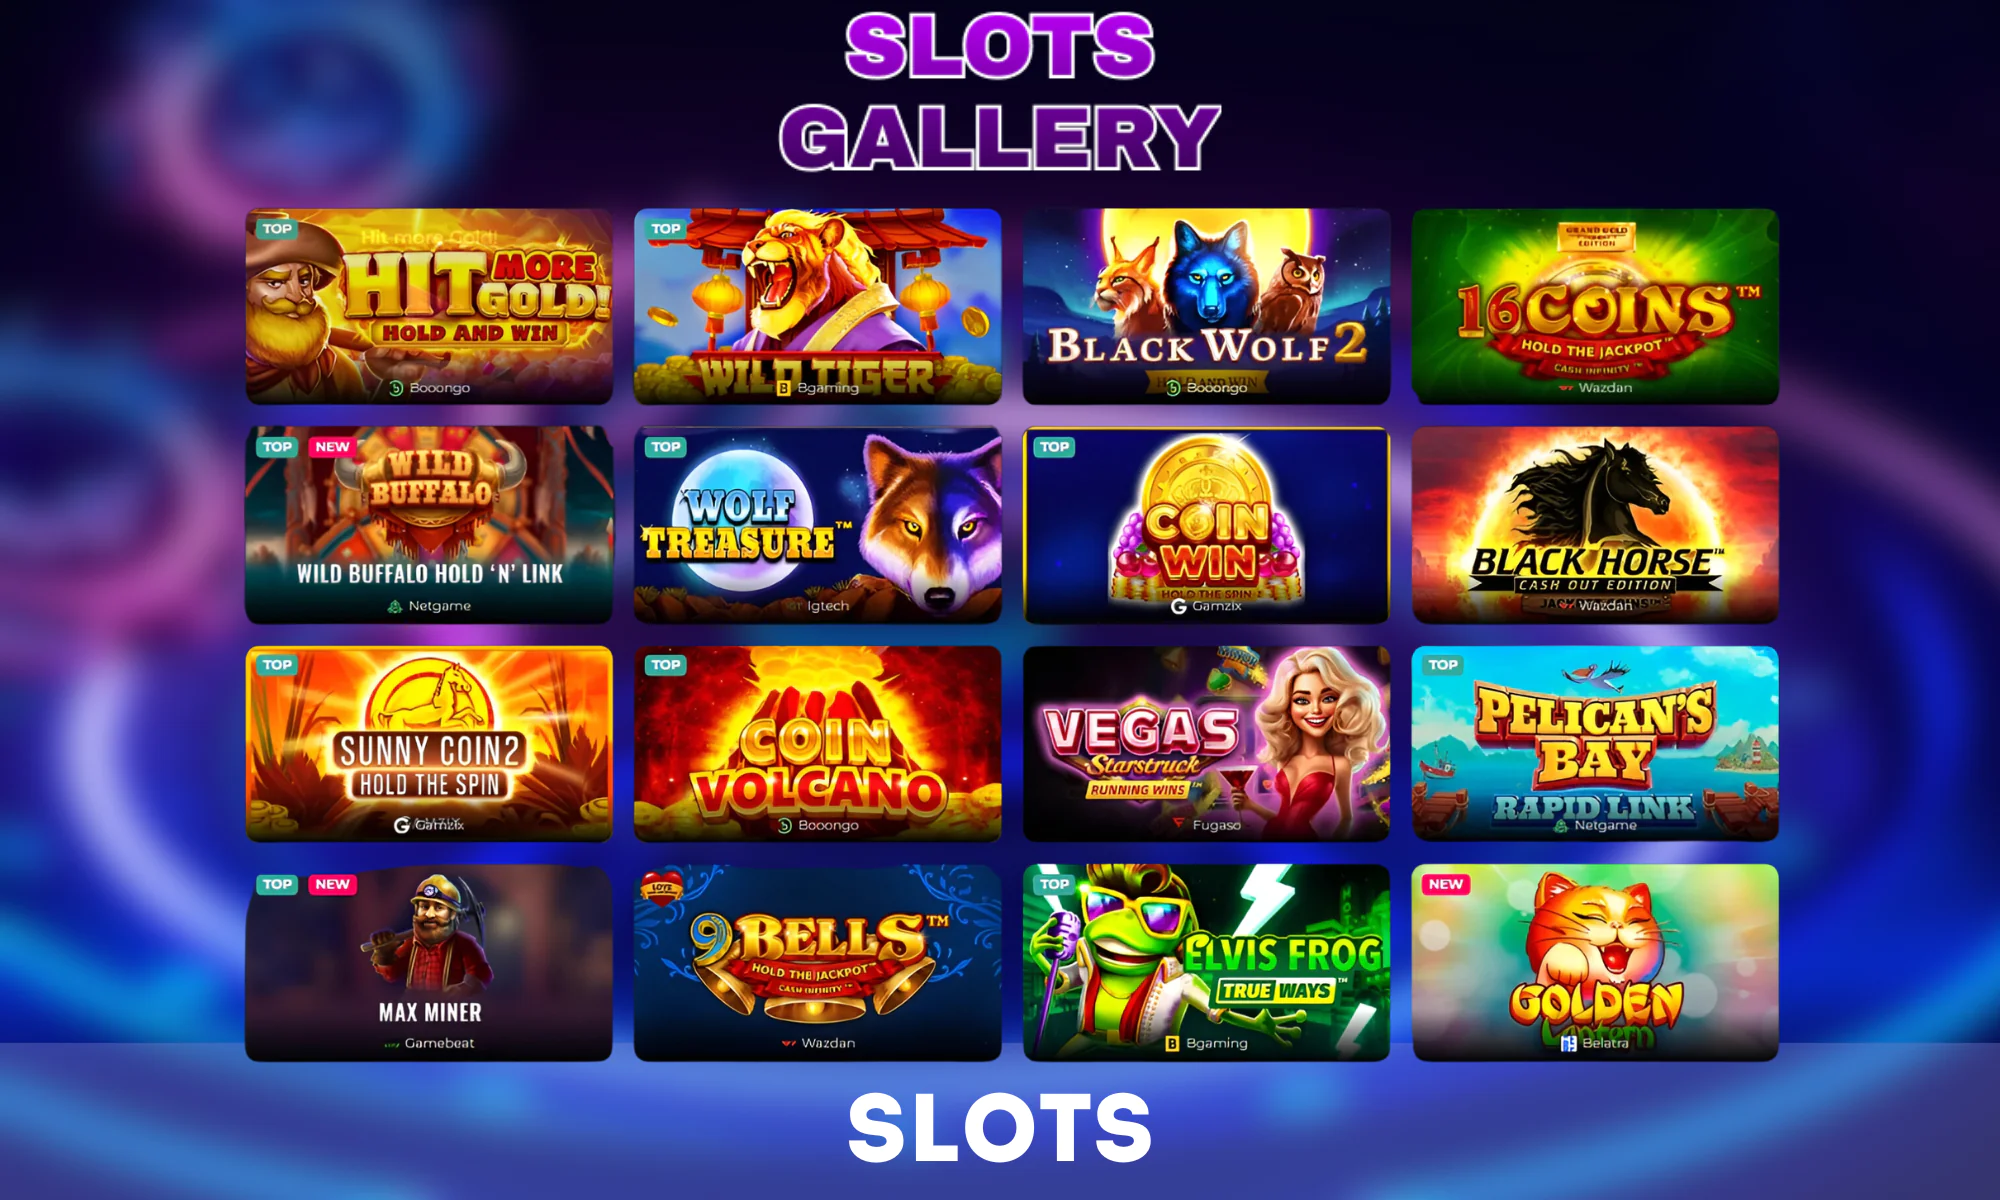 Slots Gallery Casino has over 4,000 slot machines available